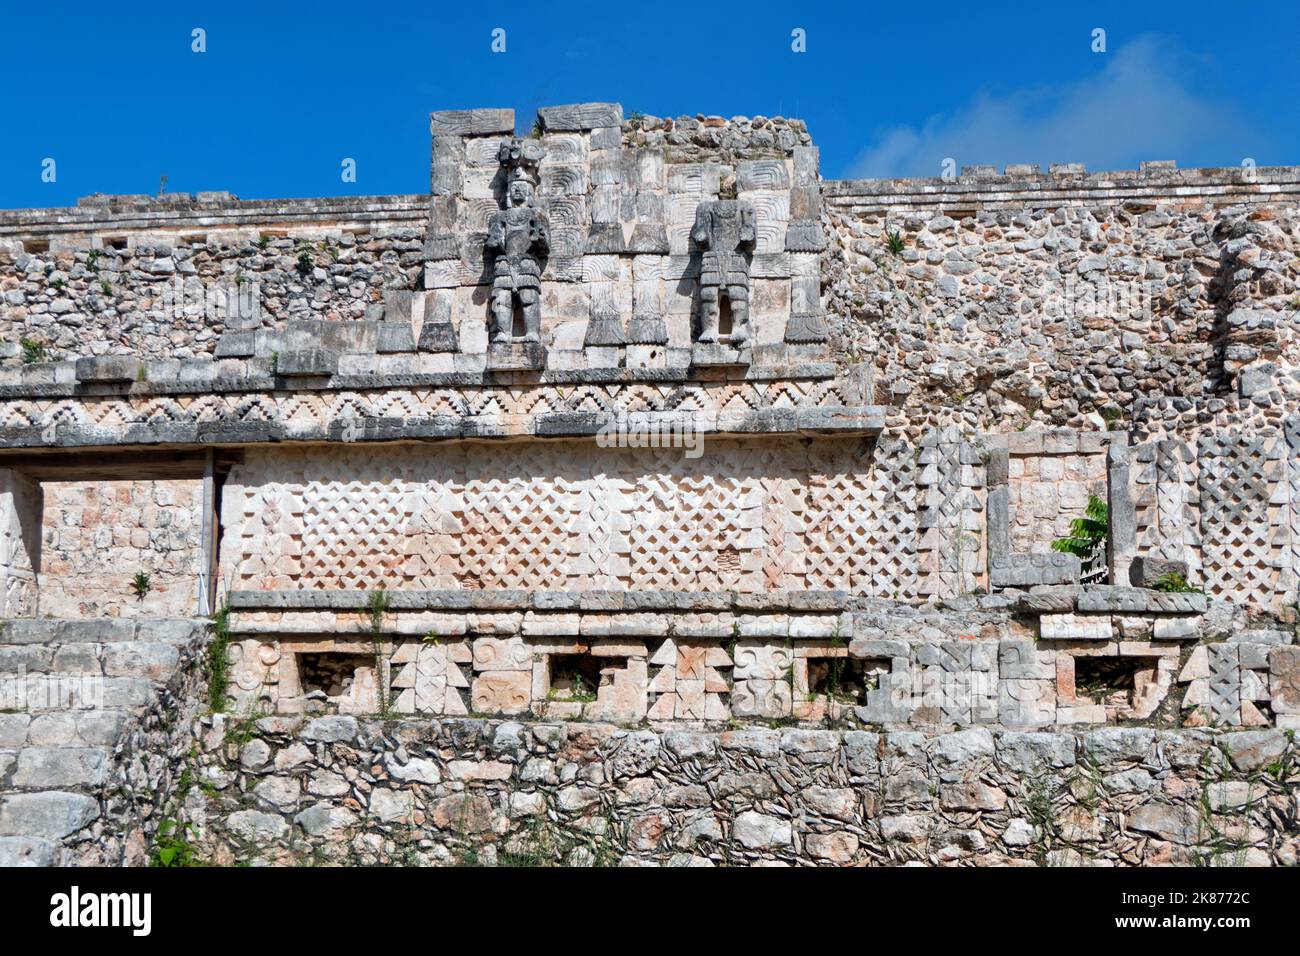 Details and close-up of bas-reliefs, decorations and statues on the Codz Poop palace at the Maya site of Kabah, Yucatan, Mexico. Mayan art on old buil Stock Photo